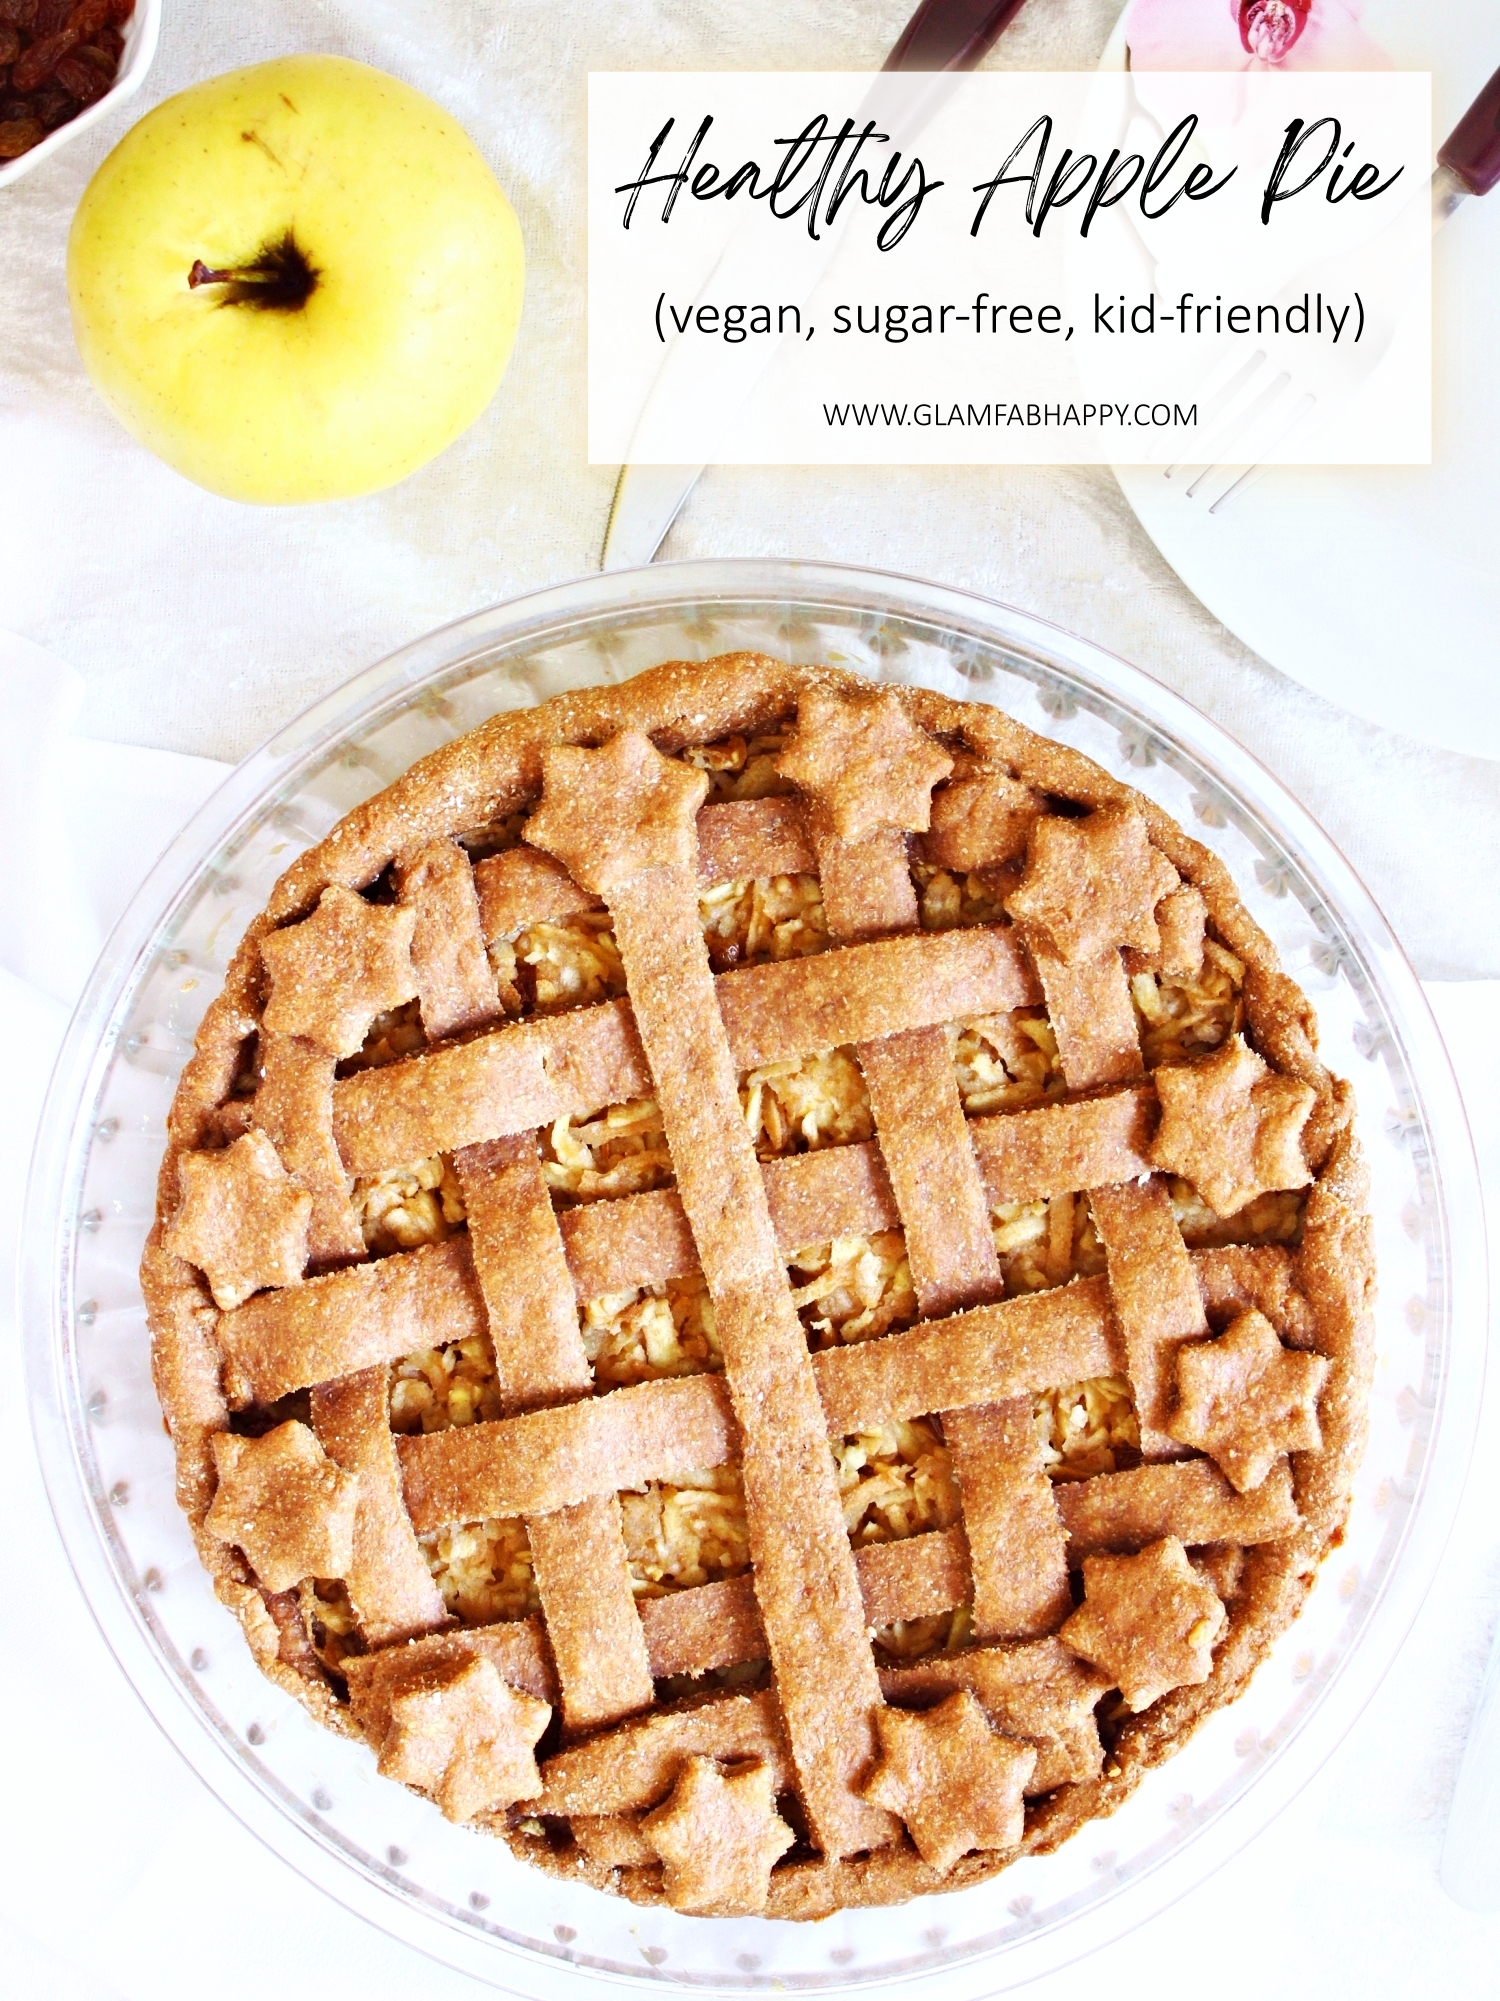 healthy apple pie low fat vegan for whole family, healthy pie recipe